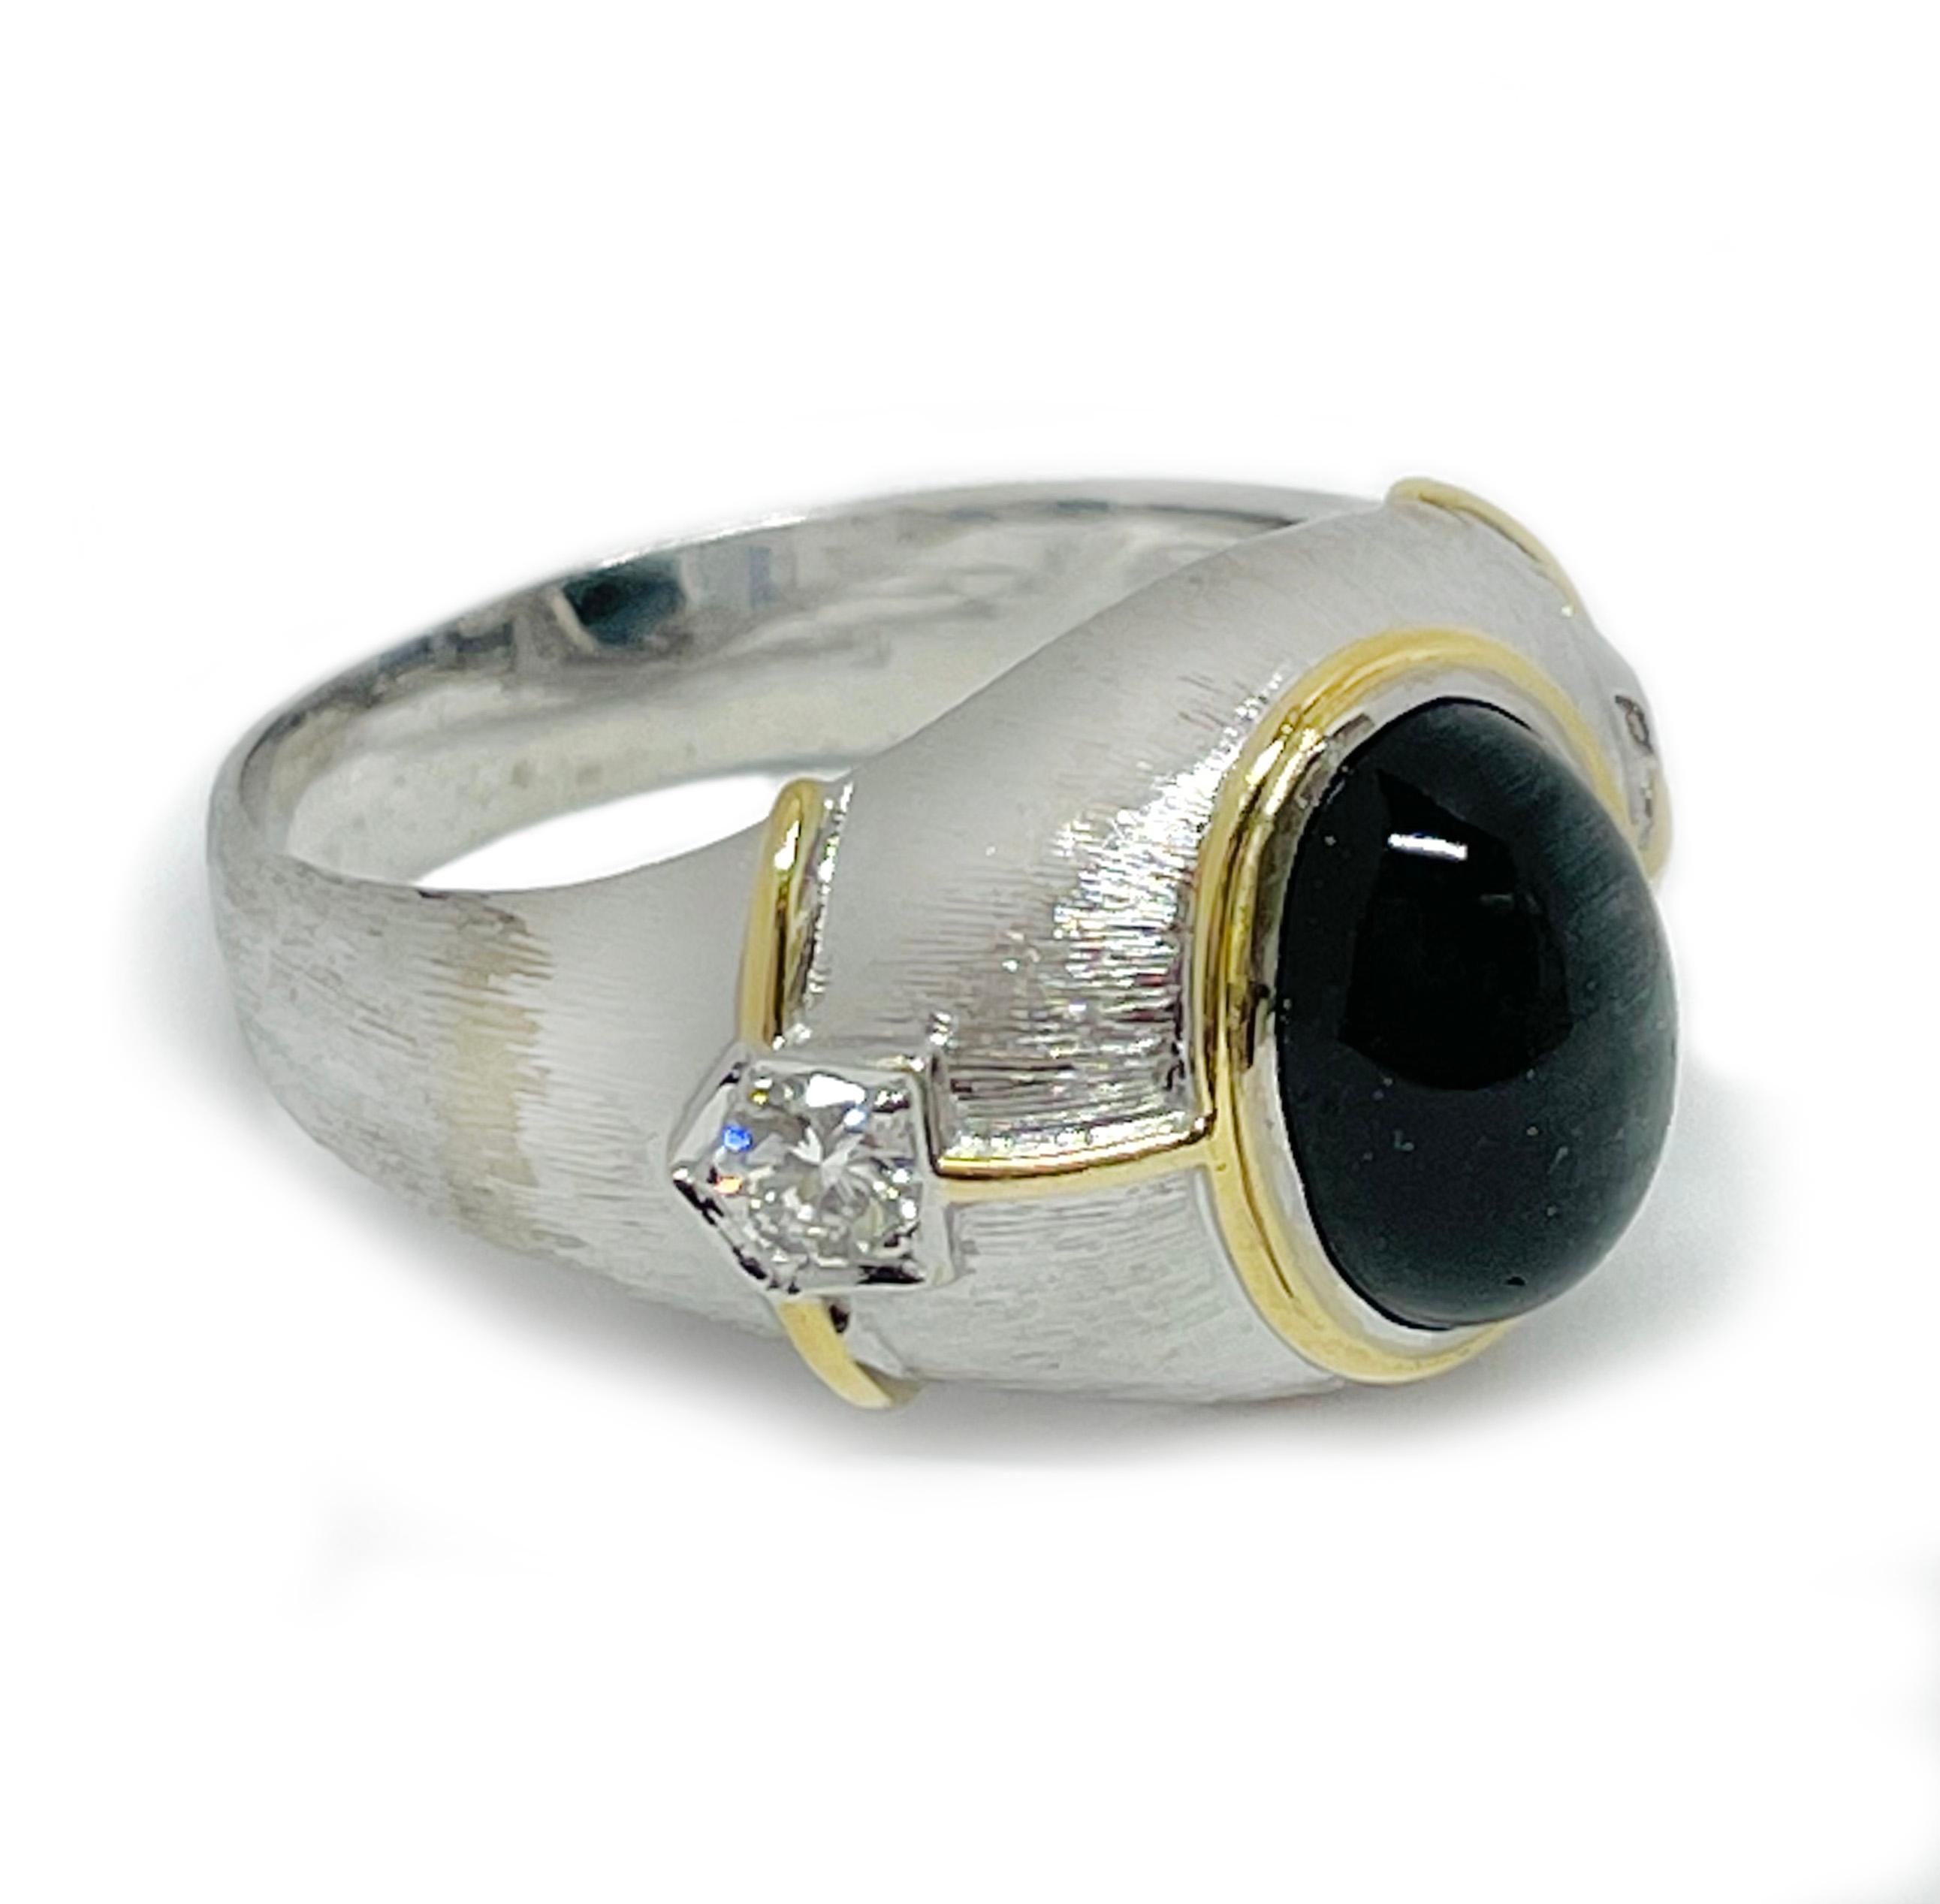 18 Karat White Gold Blue Green Cat's Eye Tourmaline Cocktail Ring with side diamonds. The sage green with hints of blue Tourmaline cabochon measures approximately 11.5mm x 8.5mm. There is a prominent single band cat's eye when light hits the